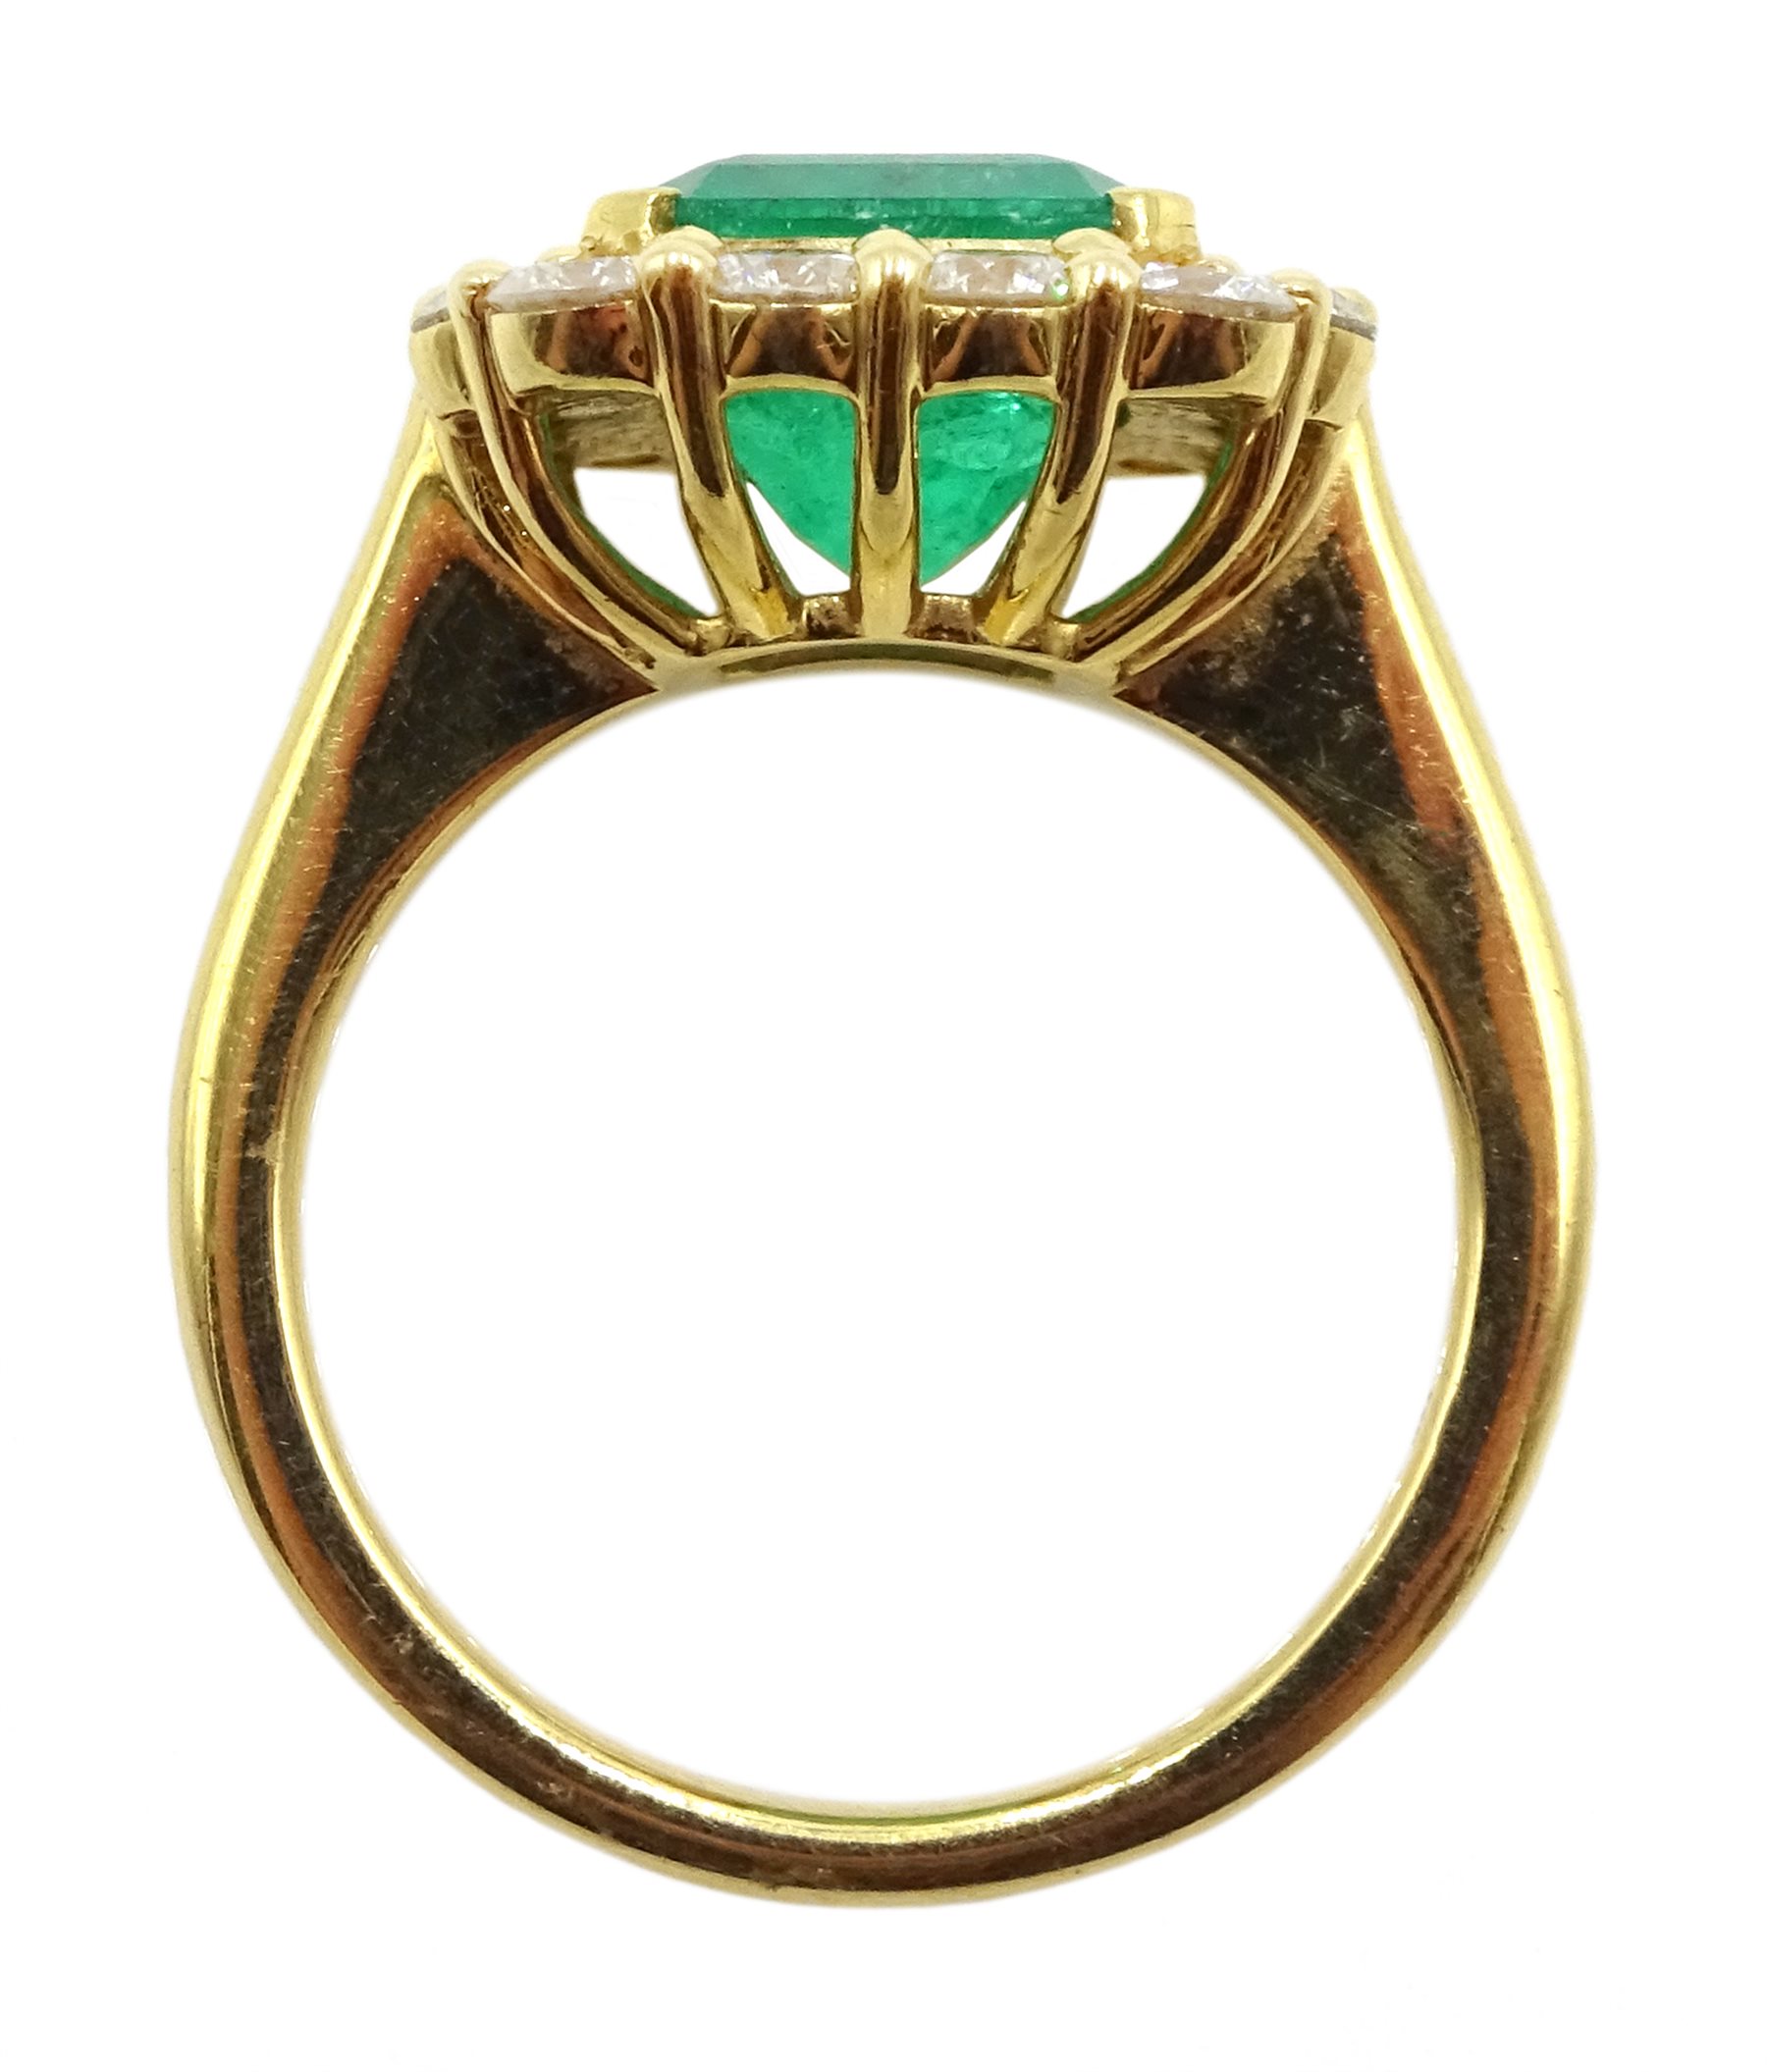 18ct gold emerald and diamond cluster ring - Image 5 of 6